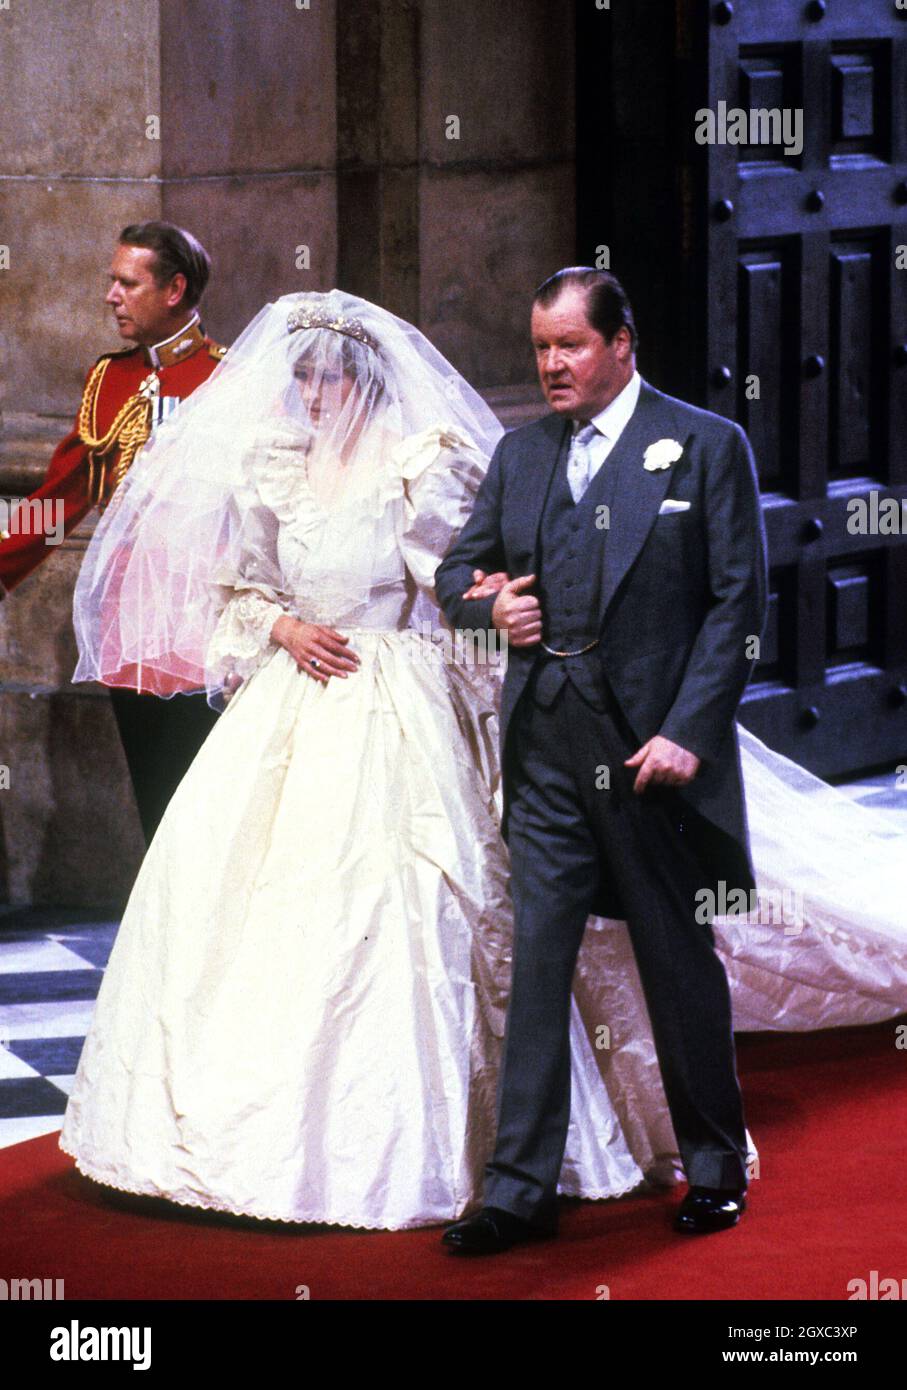 Diana, Princess of Wales is led down the aisle of St. Paul's Cathedral by her proud father, Earl Spencer, on her wedding to Prince Charles, Prince of Wales on 29 July 1981. Stock Photo